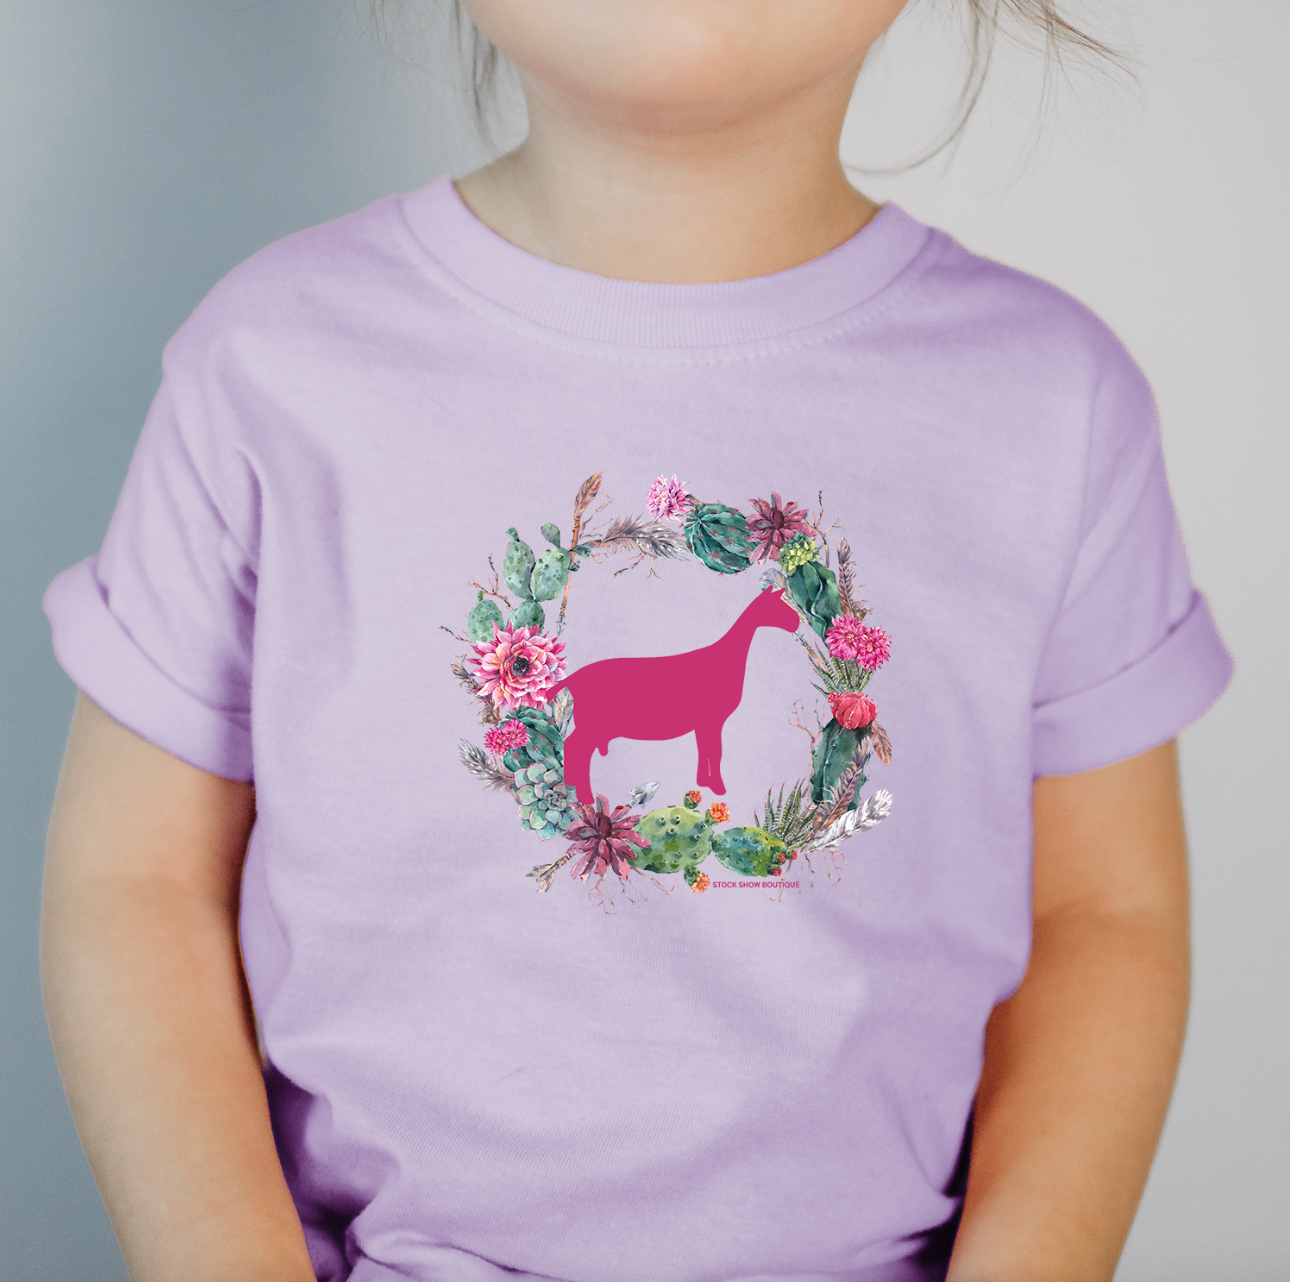 Dairy Goat Cactus Wreath One Piece/T-Shirt (Newborn - Youth XL) - Multiple Colors!